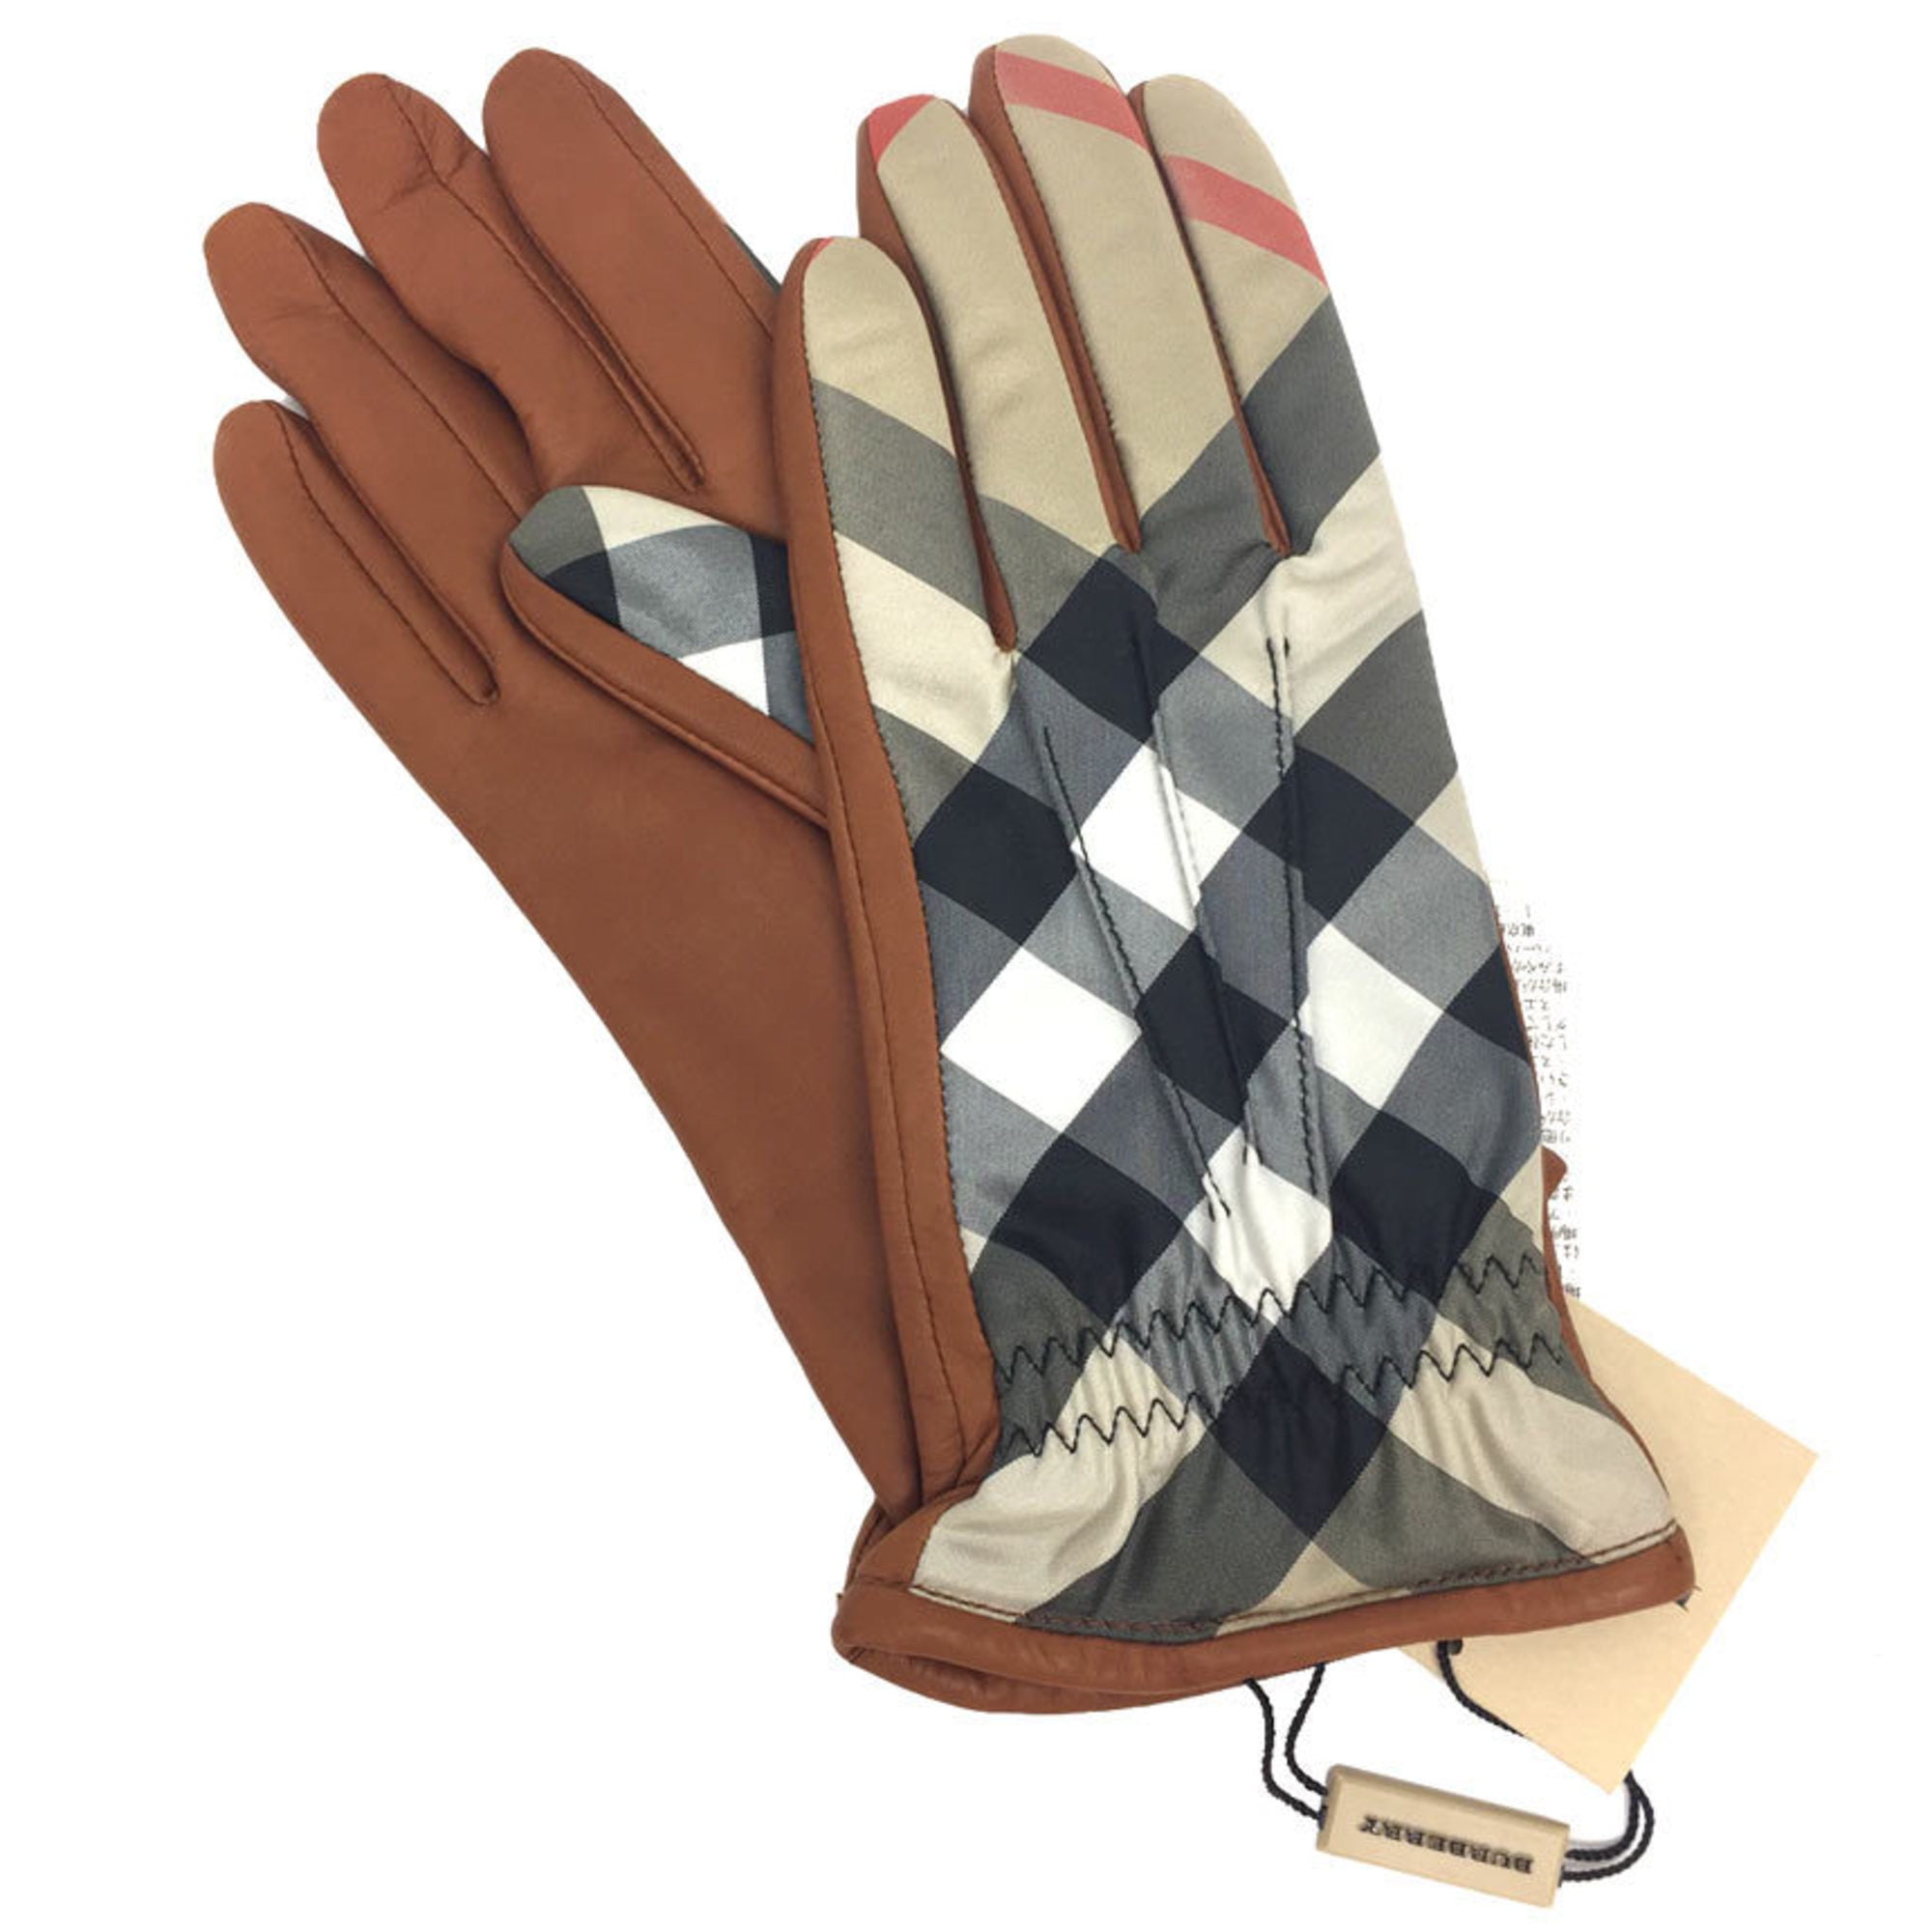 Burberry Alligator Leather Gloves, $2,095, Burberry